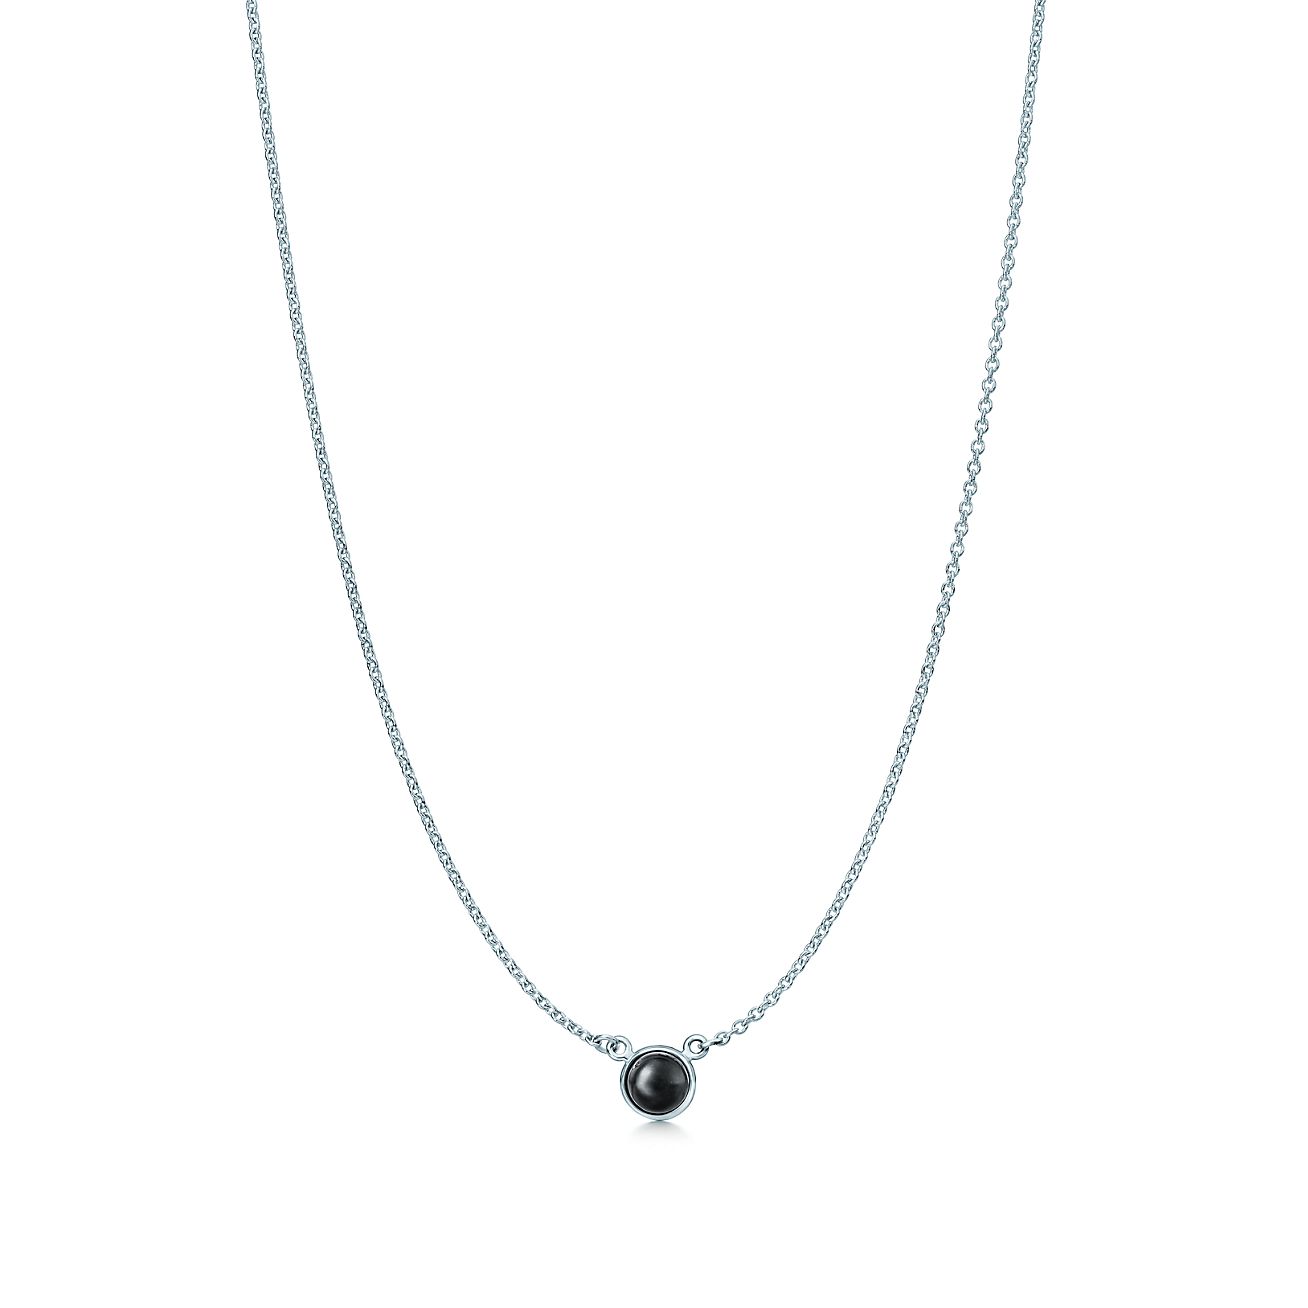 tiffany and co necklace turned black